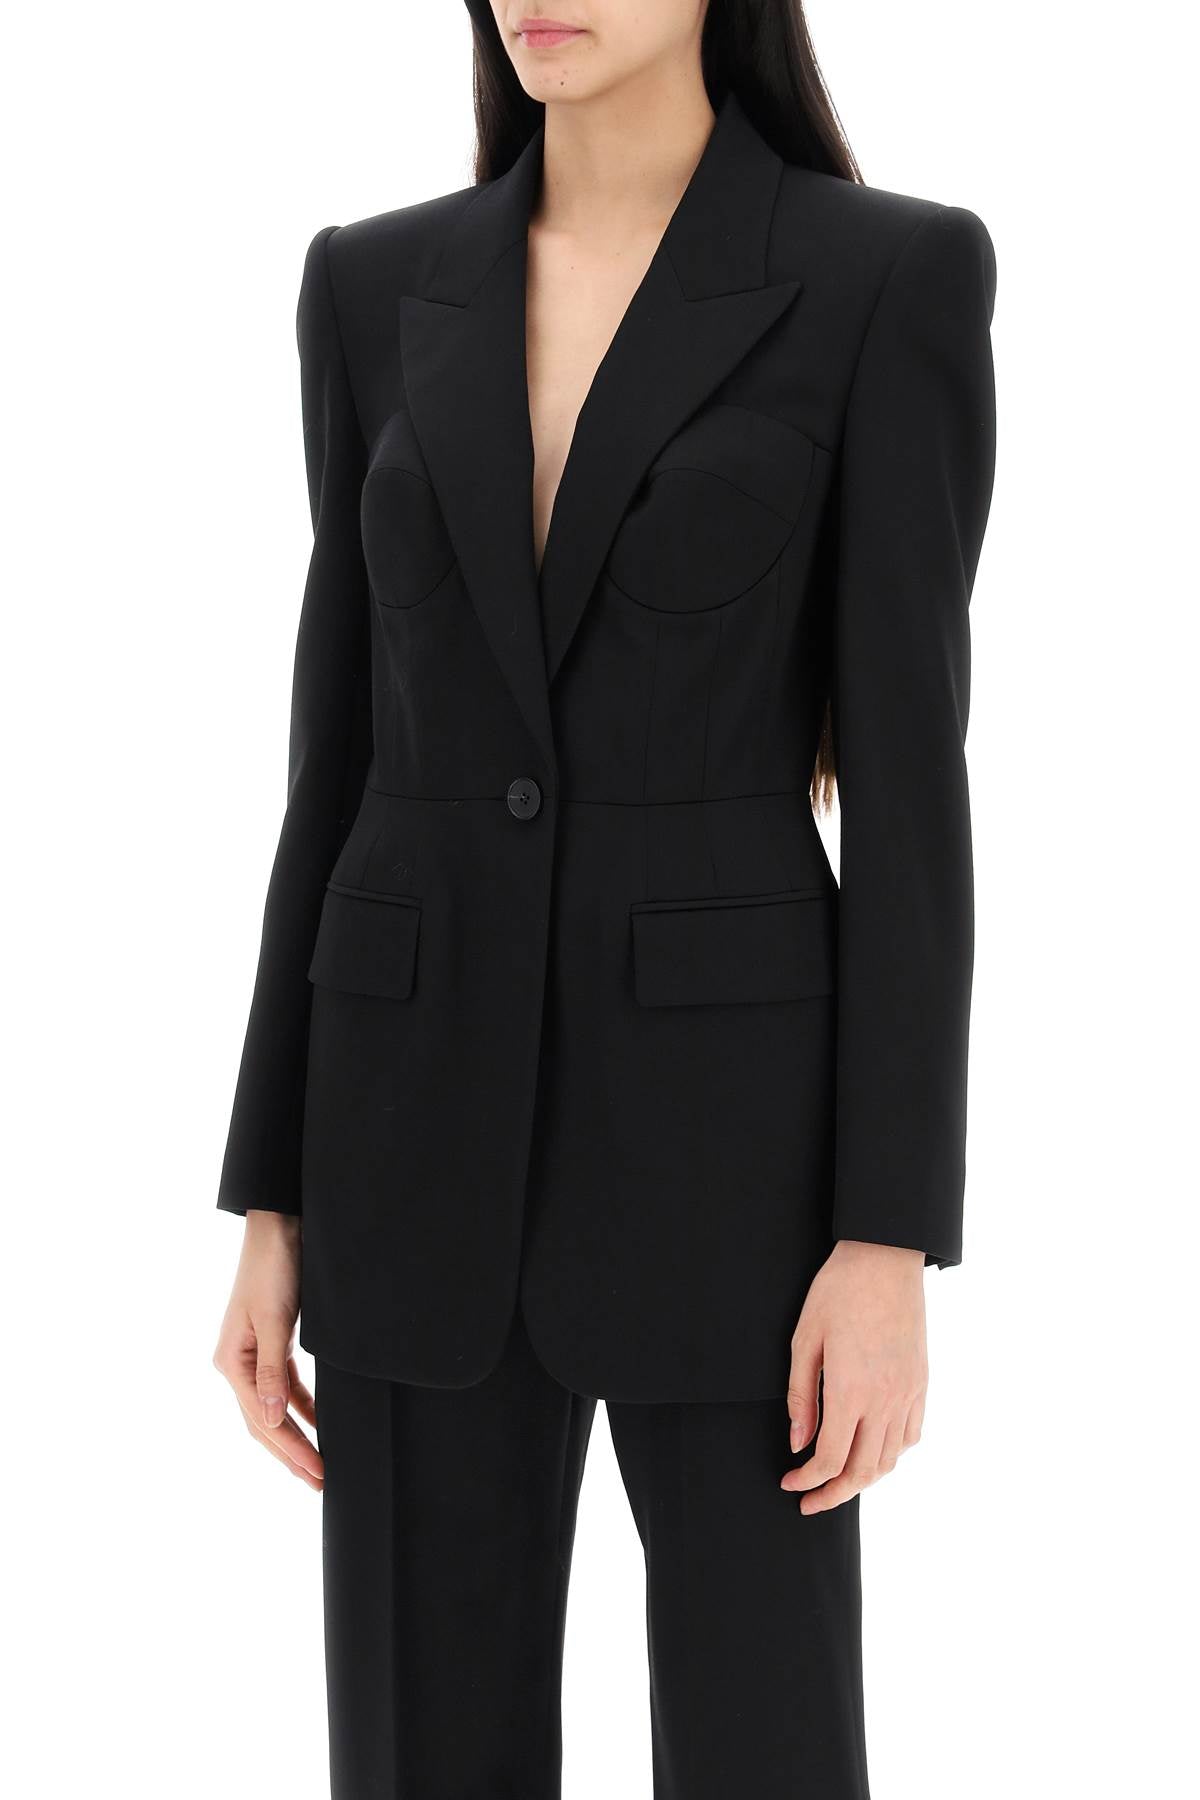 Alexander mcqueen fitted jacket with bustier details-3